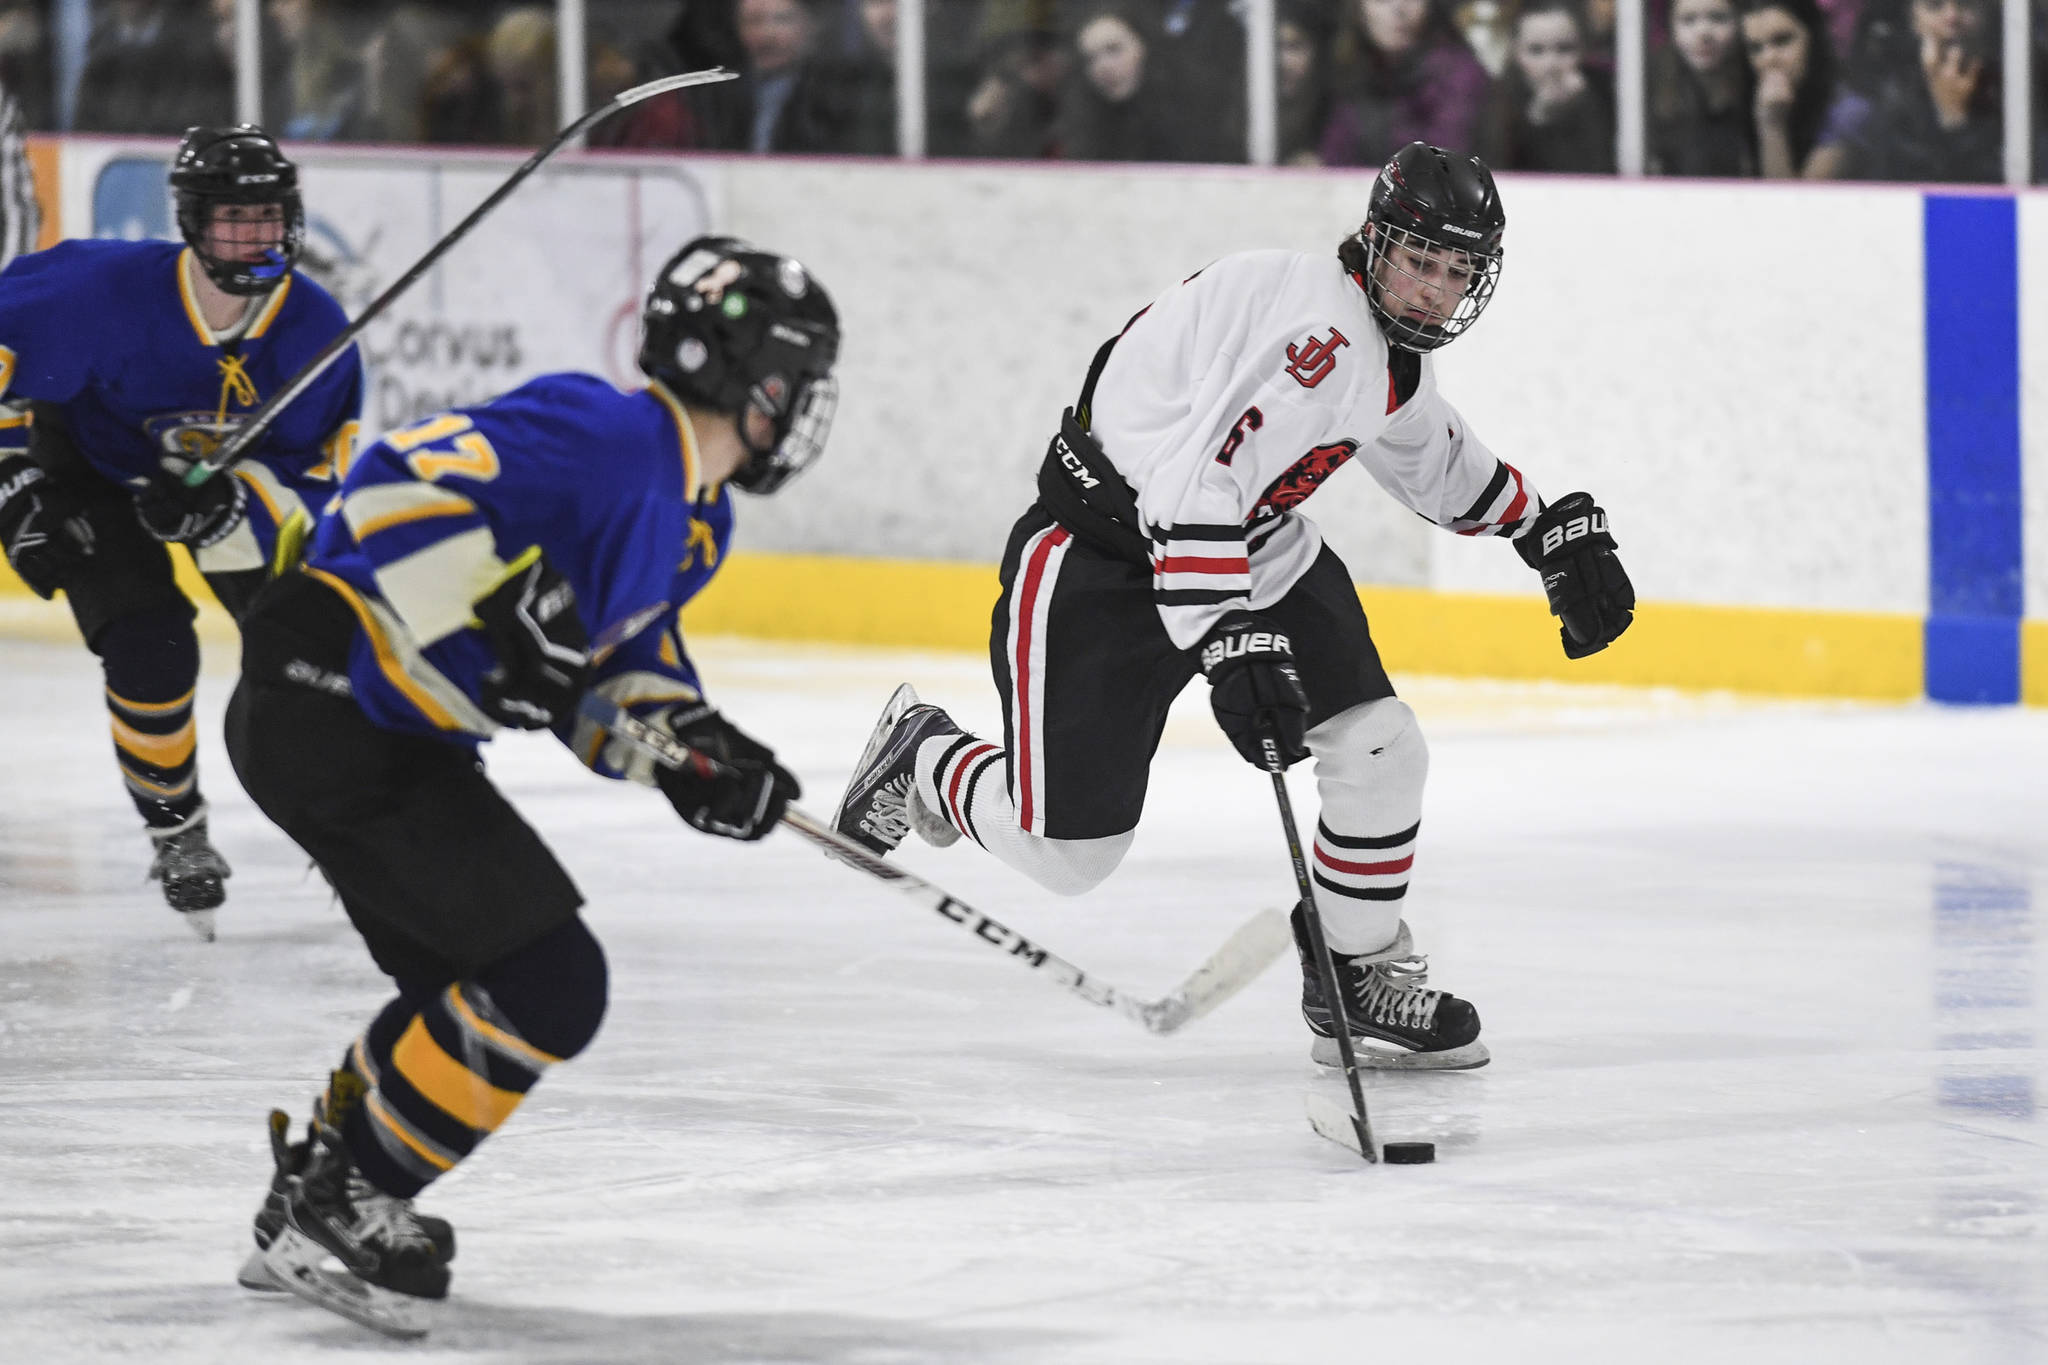 Juneau-Douglas’ Colter Polley moves the puck against Monroe Catholic’s Miles Fowler at the Treadwell Arena on Friday, Nov. 15, 2019. JDHS won 10-0. (Michael Penn | Juneau Empire)